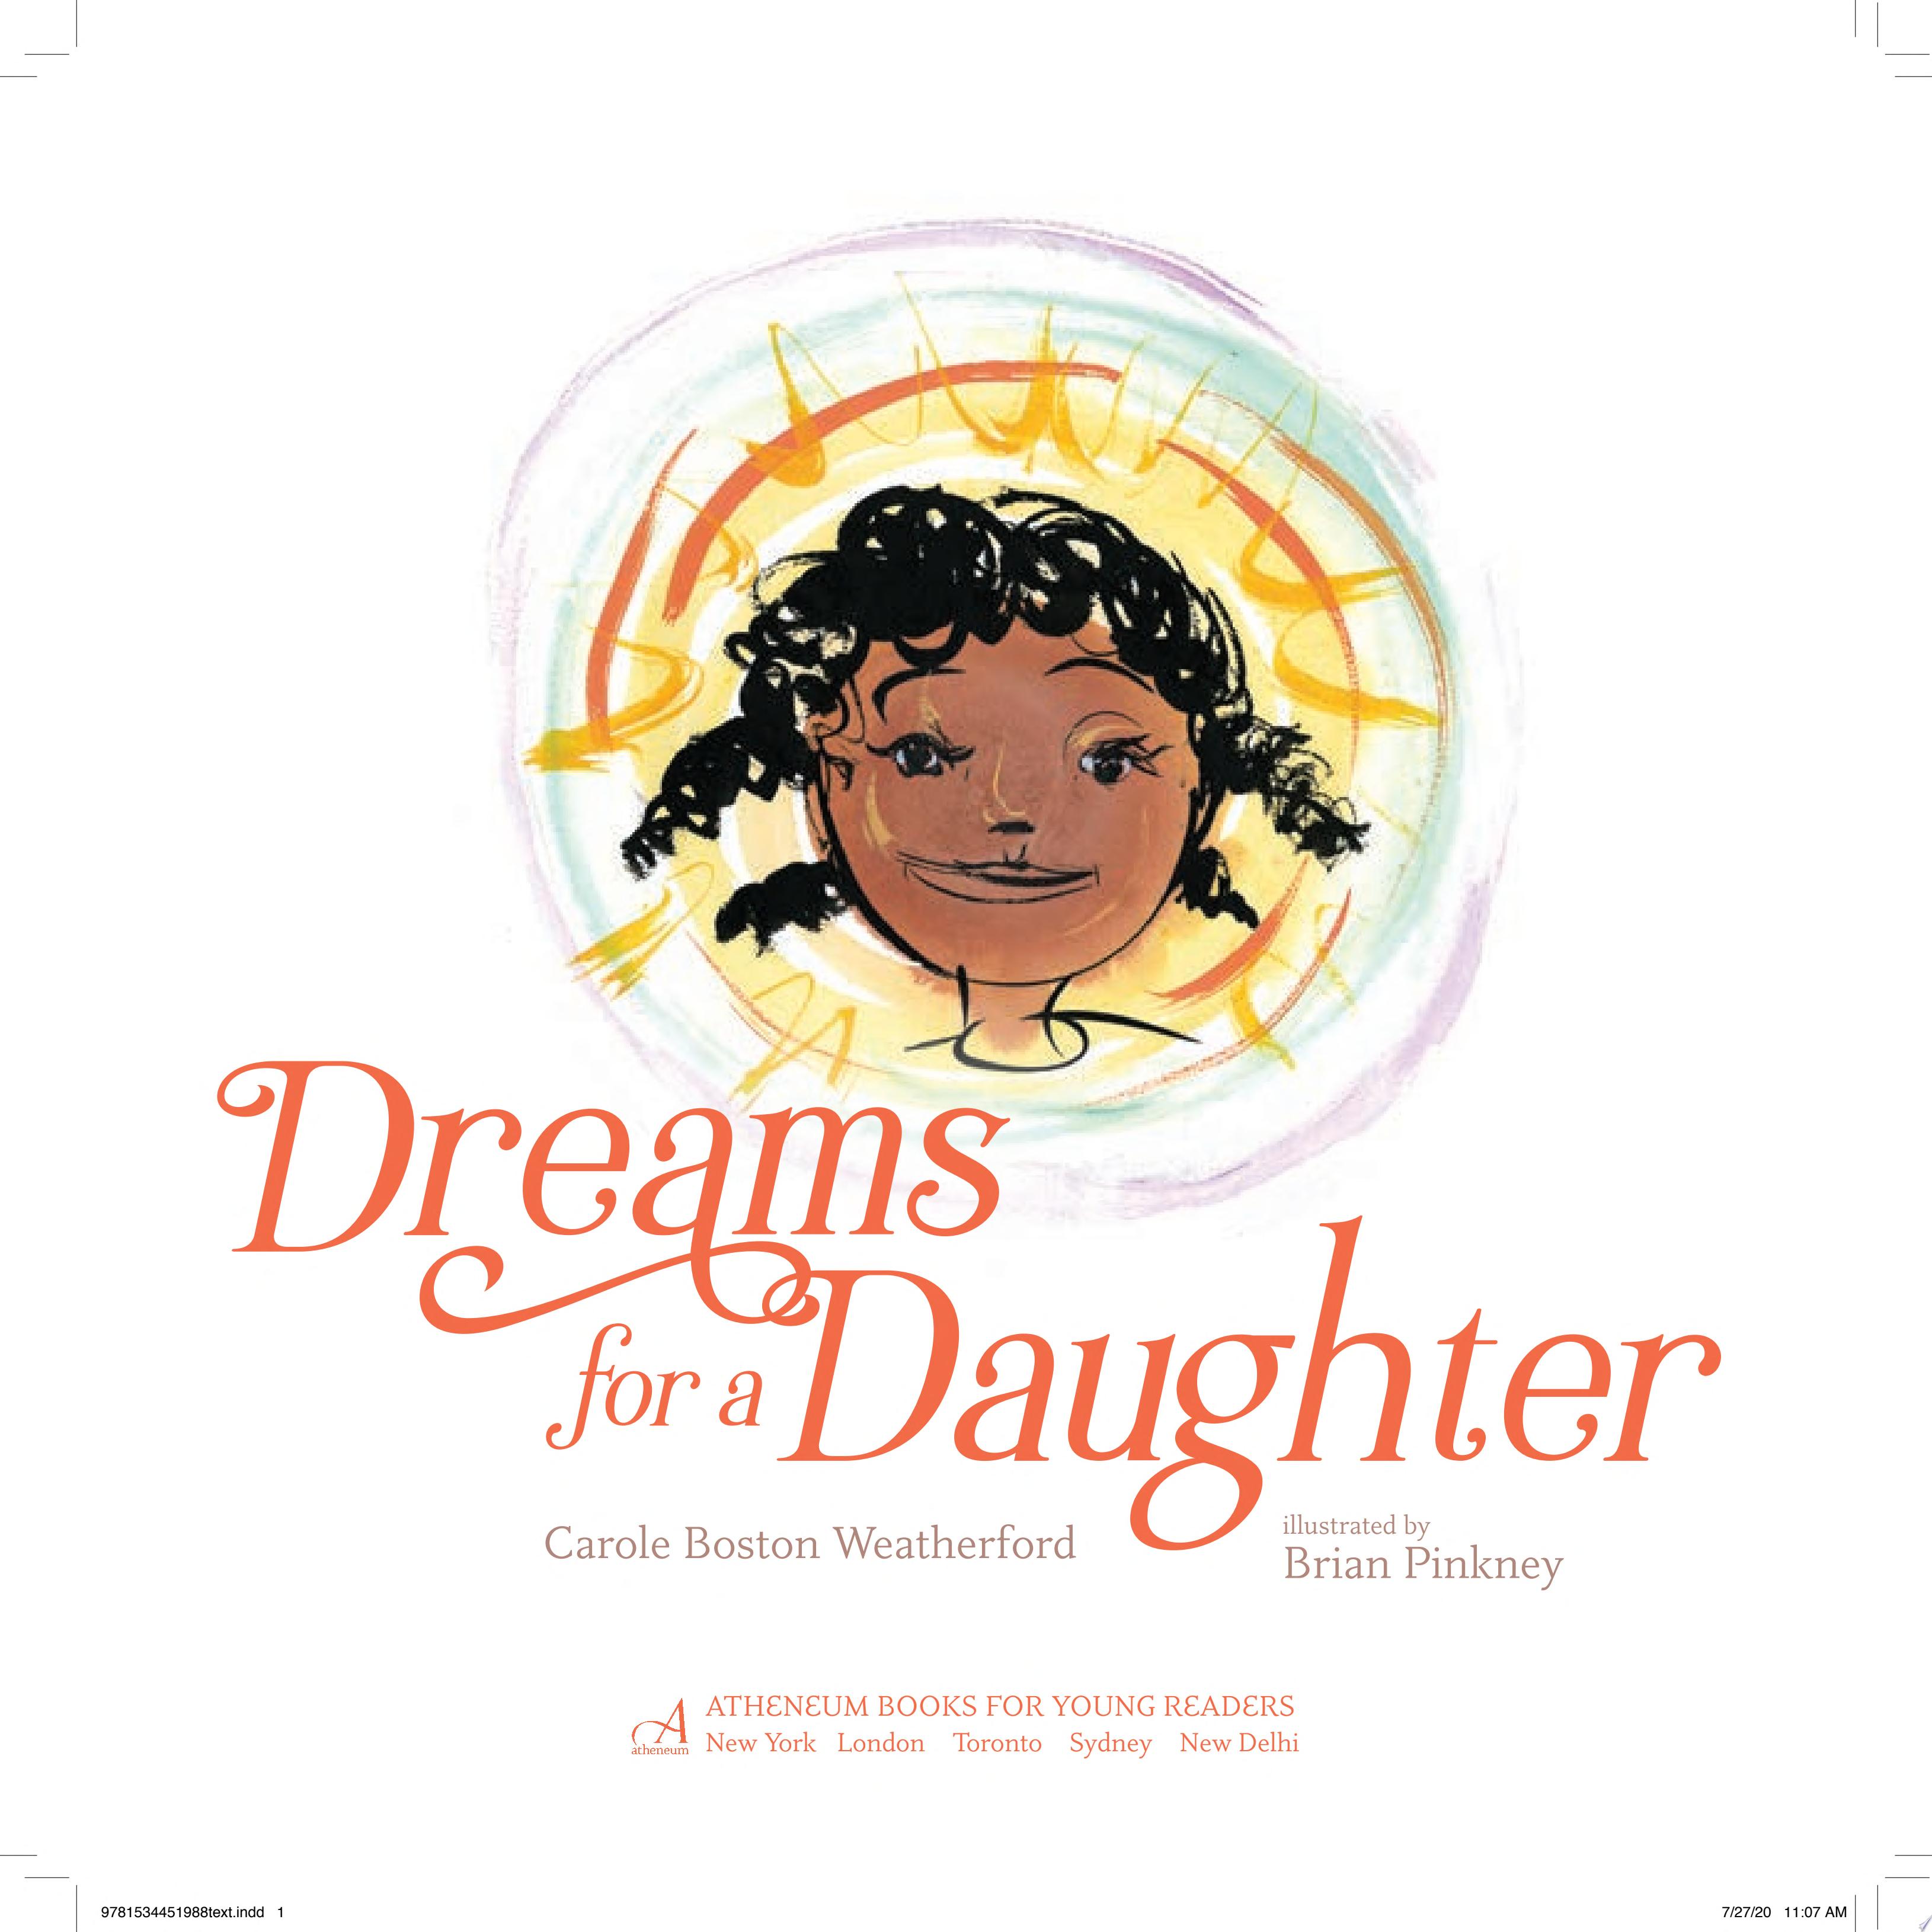 Image for "Dreams for a Daughter"